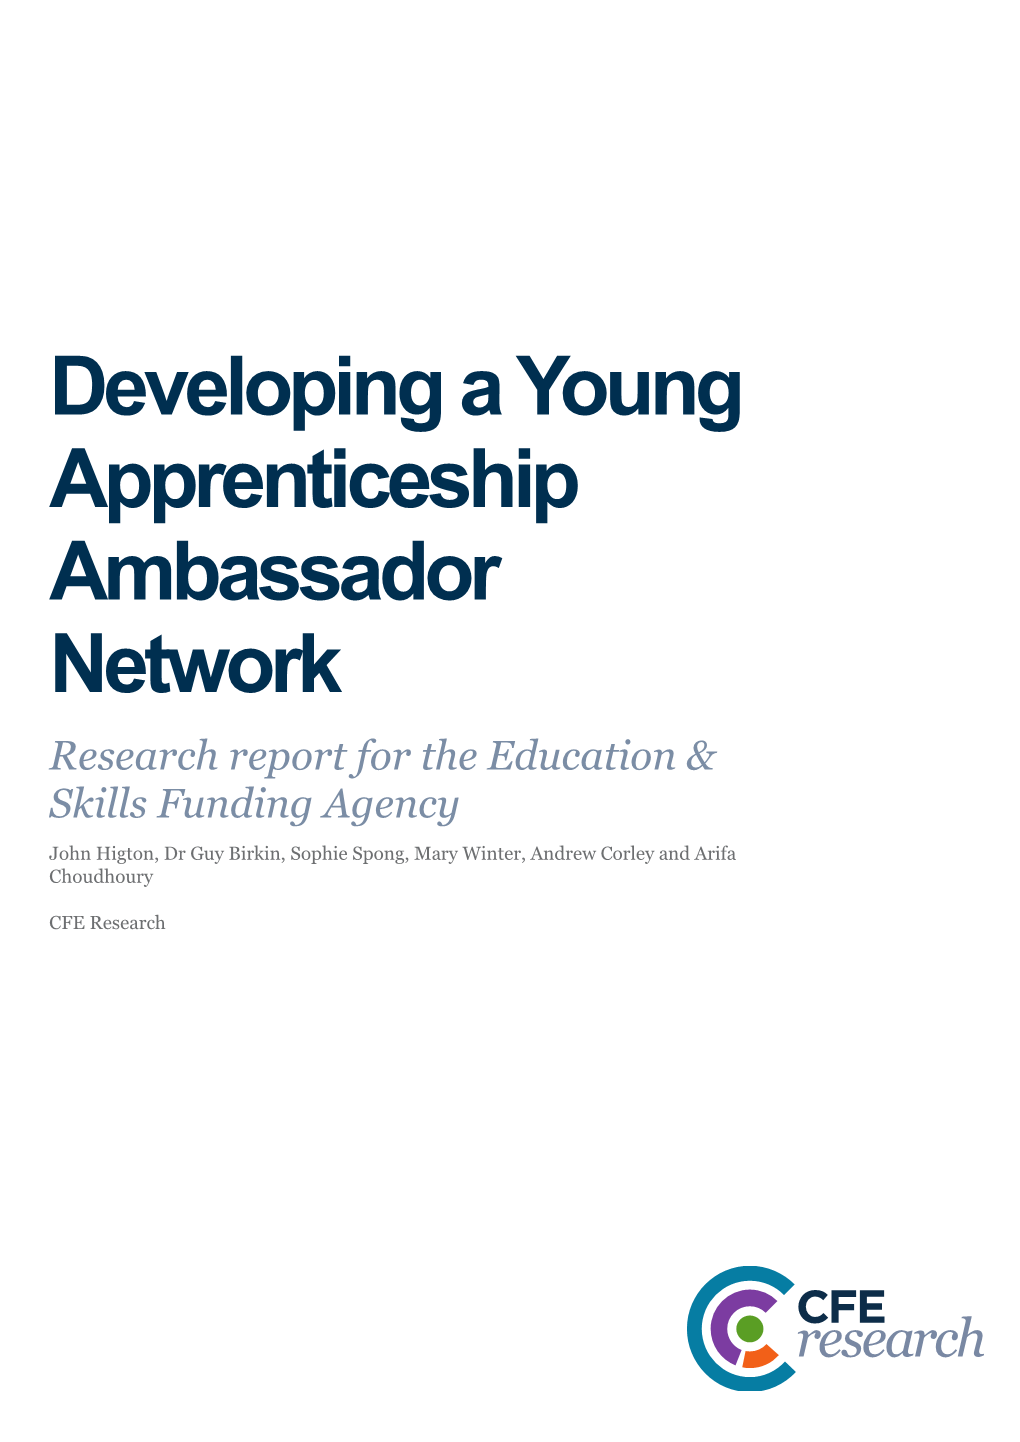 Developing a Young Apprenticeship Ambassador Network